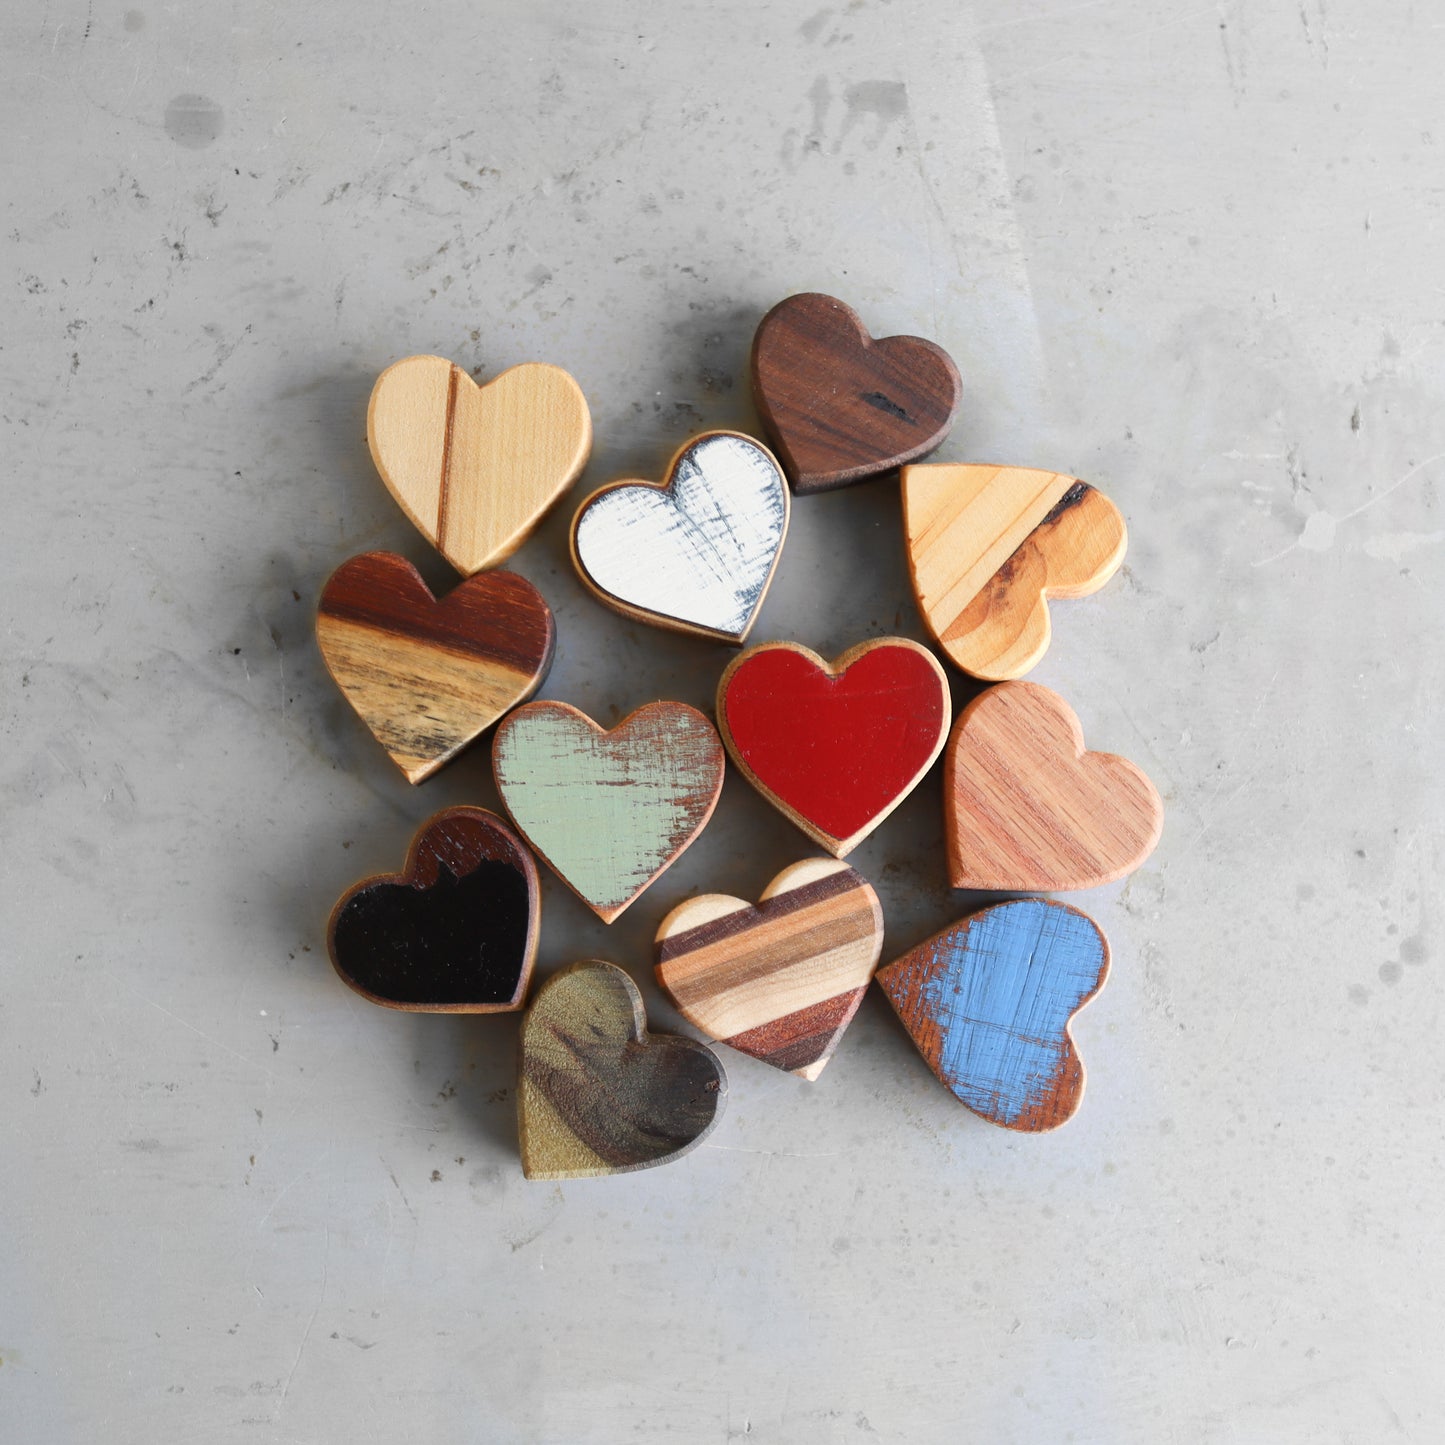 FUNSUEI 300 Pcs Small Wooden Hearts for Crafts, Rustic Wooden Hearts, Wooden Heart Sign Blank Wooden Heart Confetti for Guest Book, Wedding